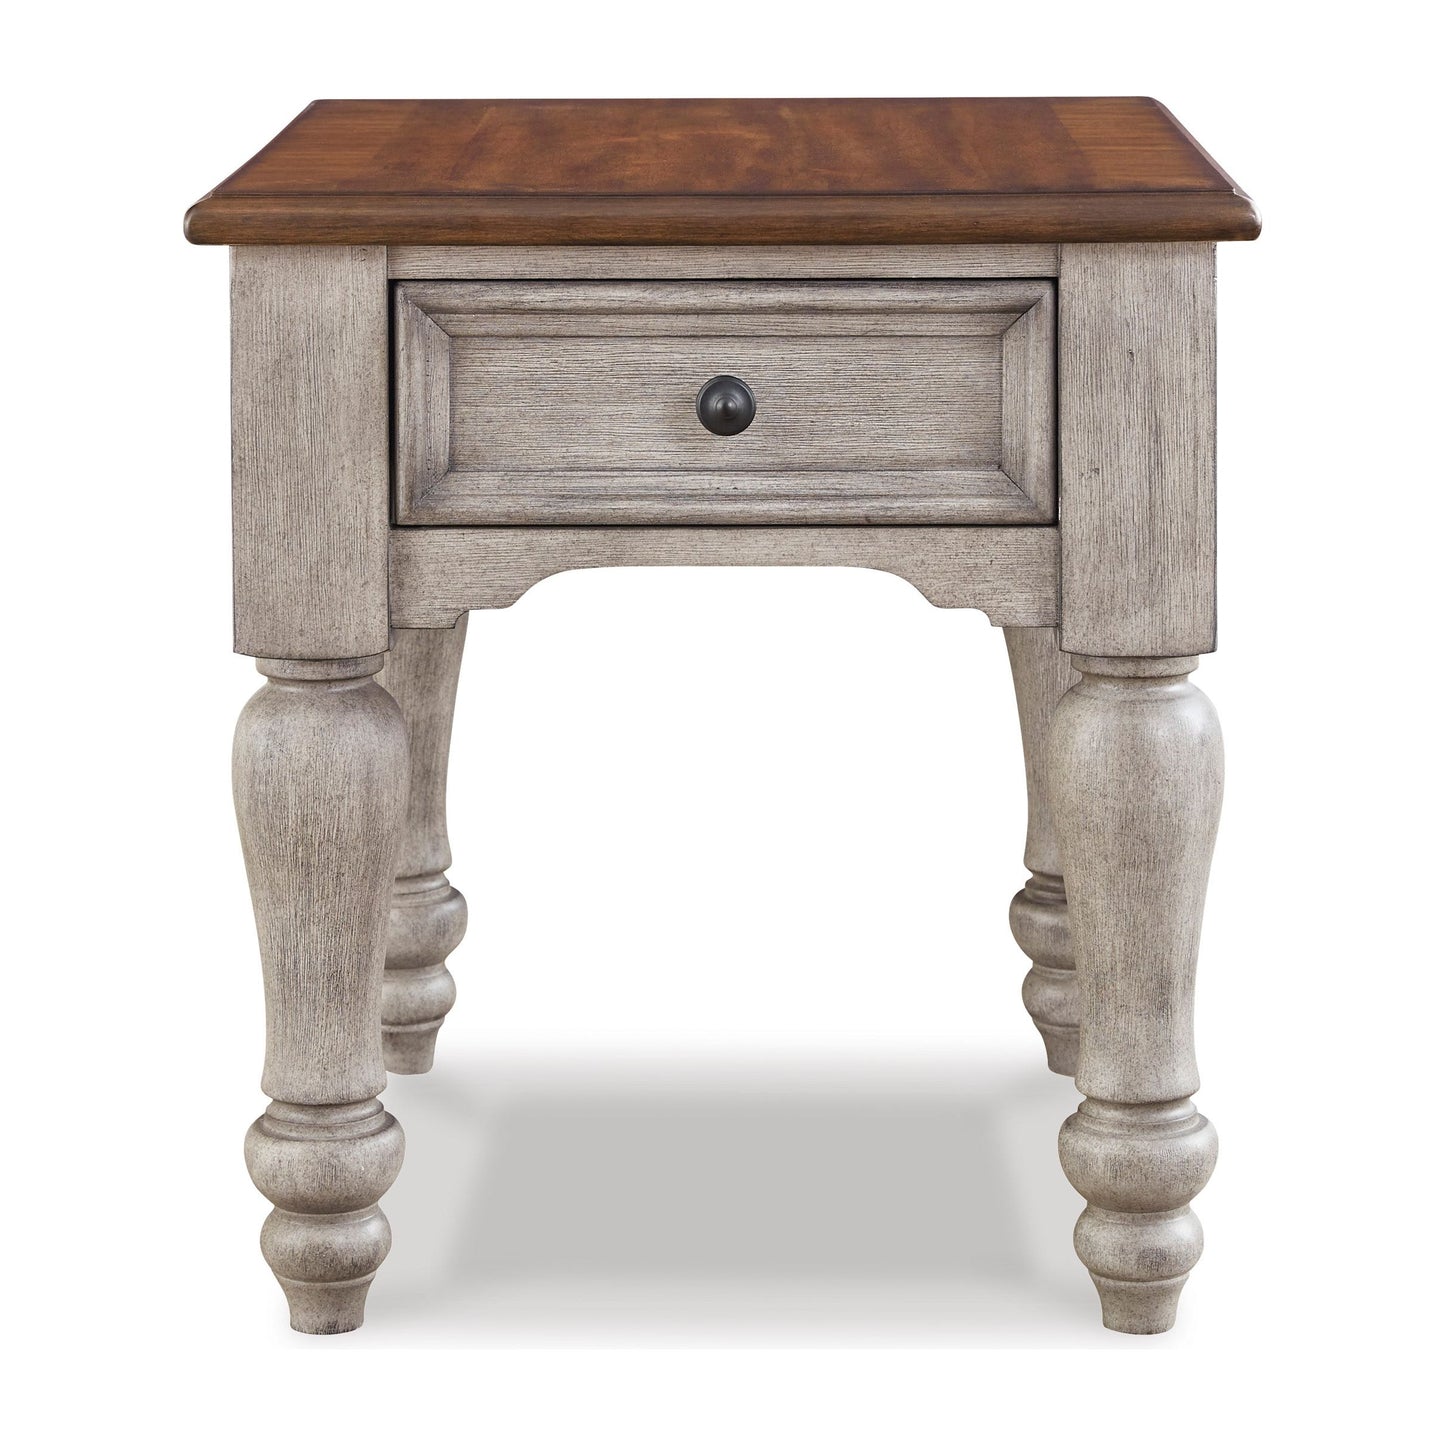 LODENBAY END TABLE - ANTIQUE GRAY/BROWN